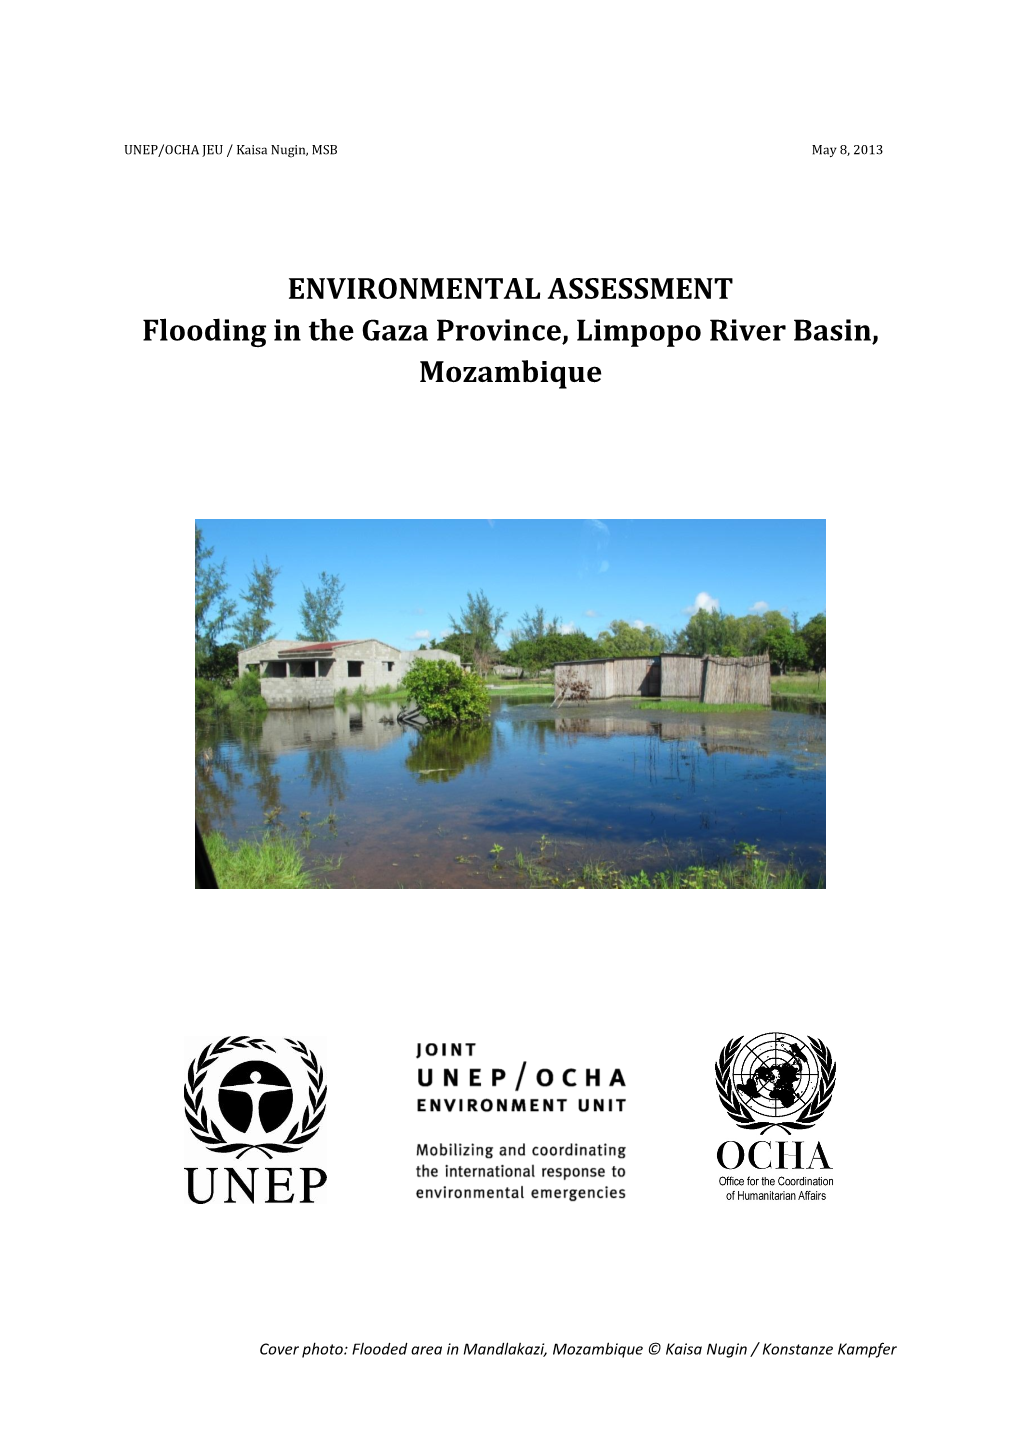 Environmental Impact of Flooding in the Gaza Province, Limpopo River